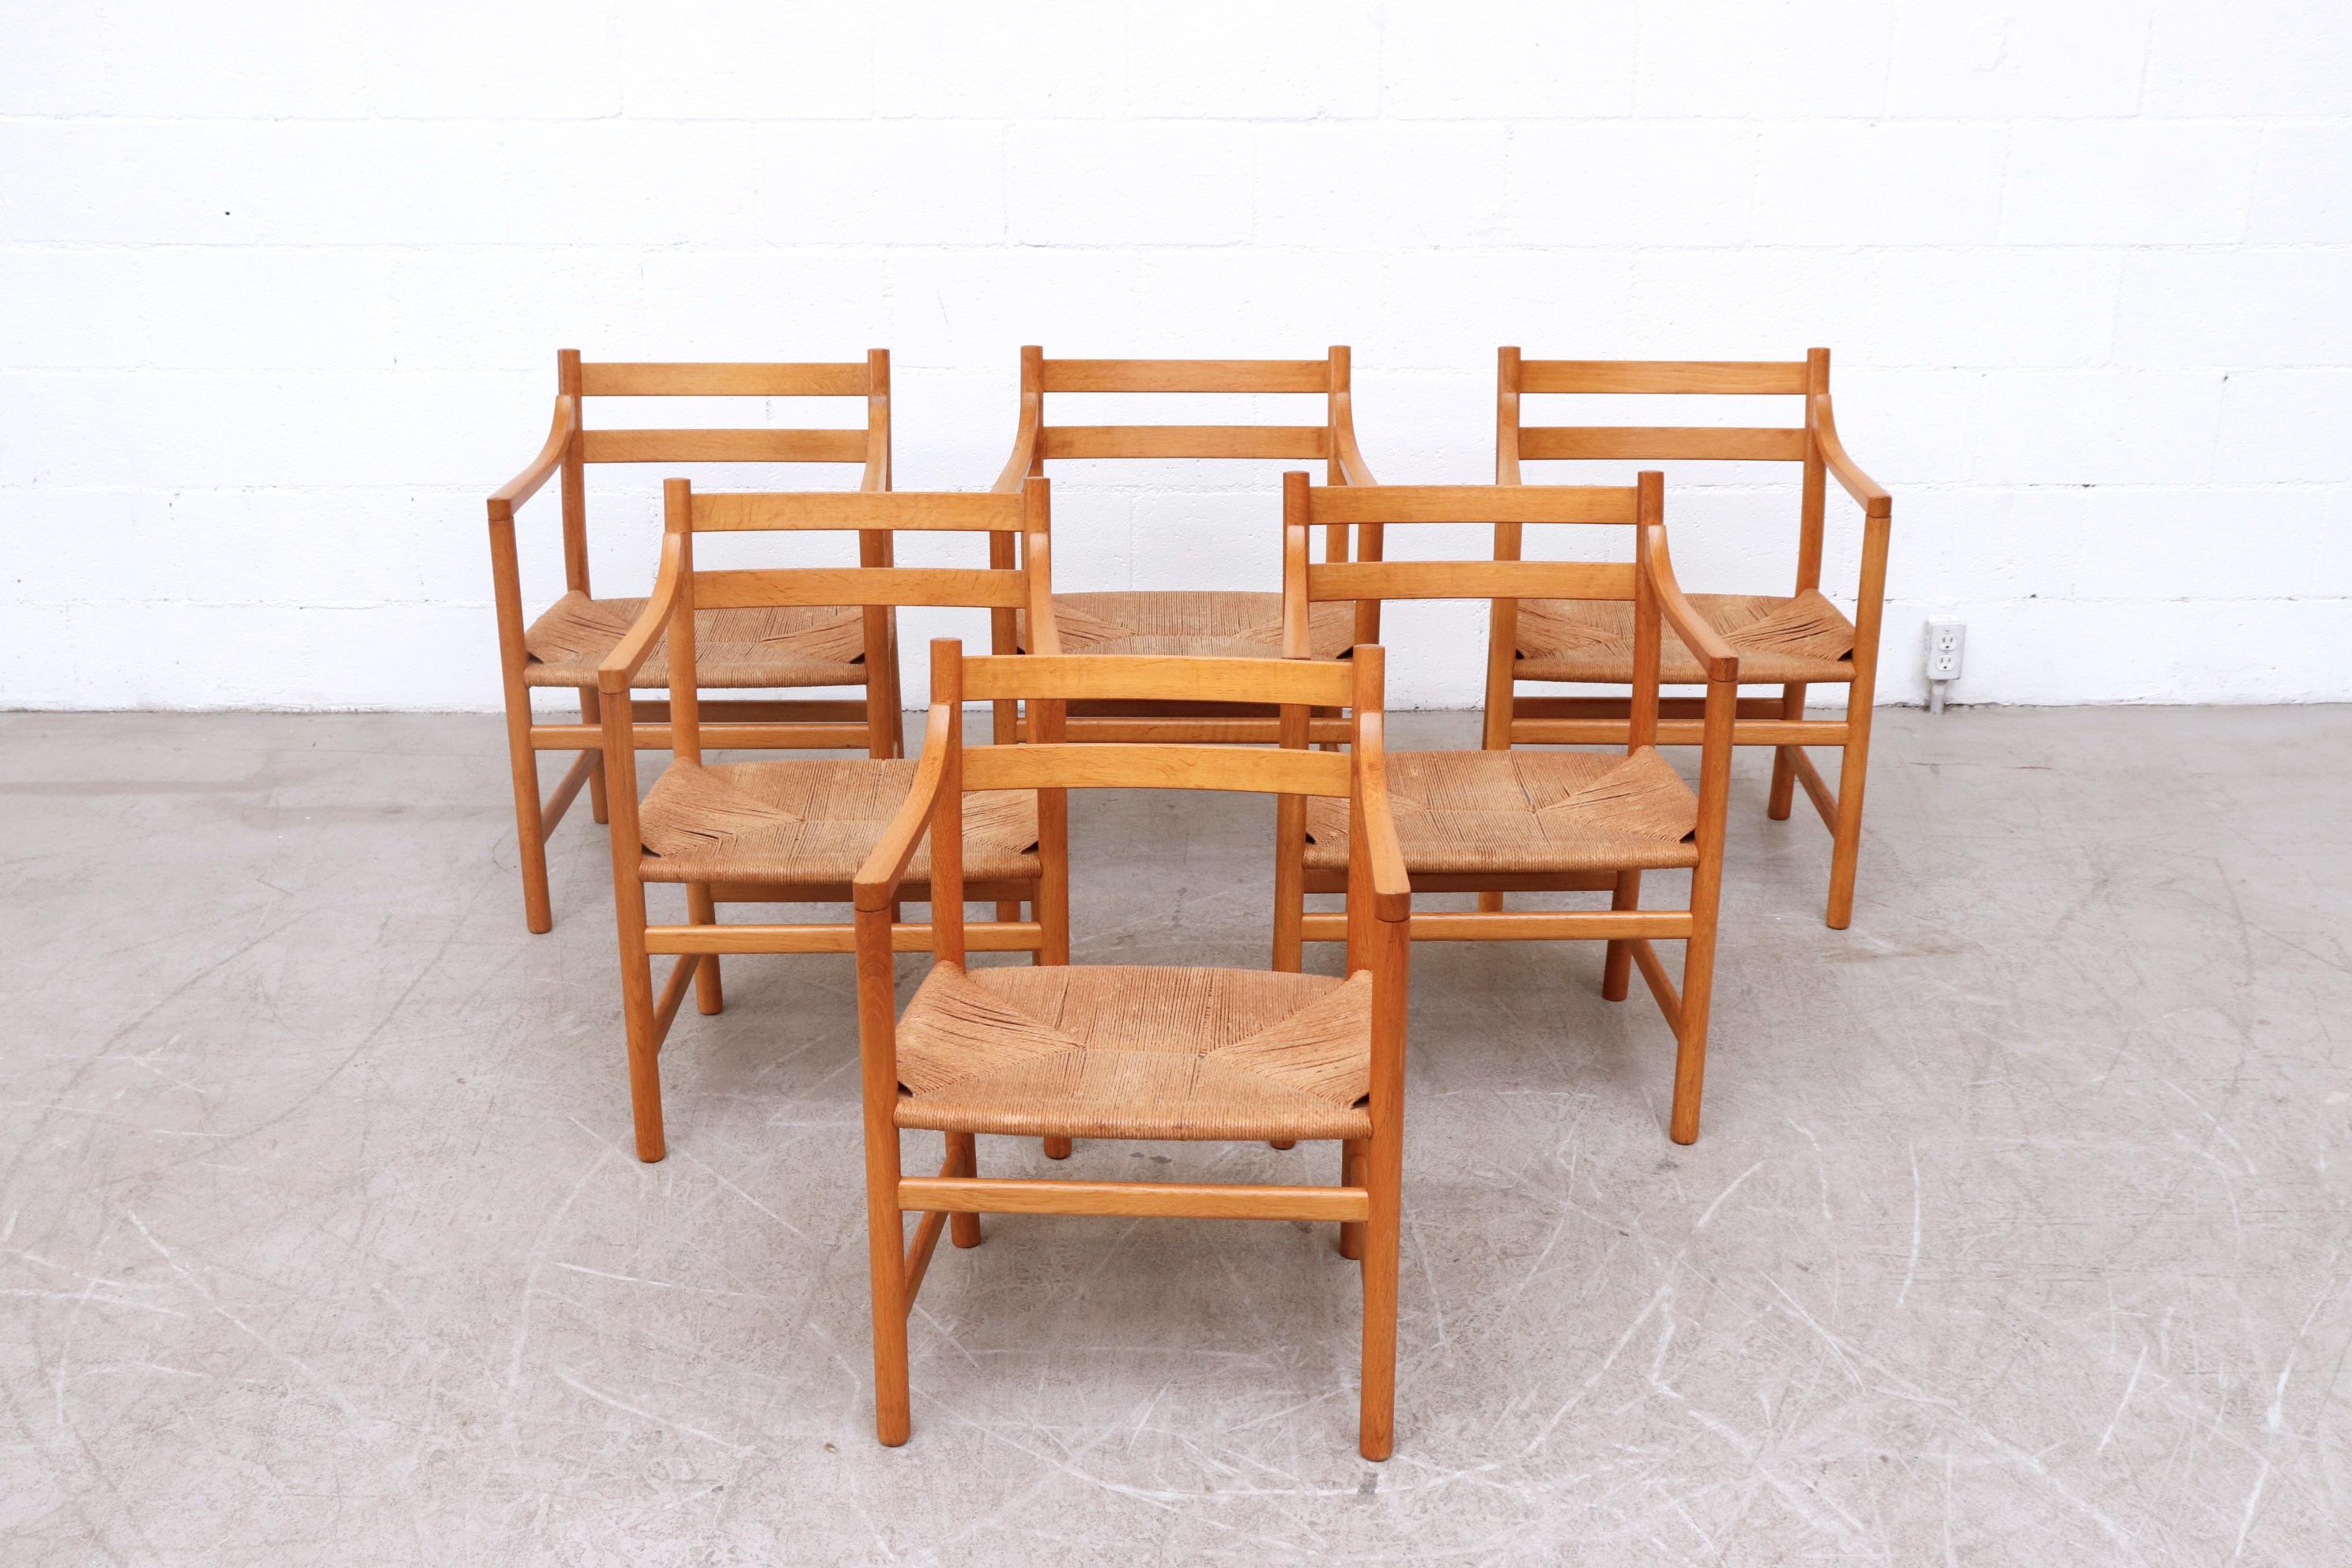 Set of 6 beautiful midcentury natural oak armchairs with paper cord seating. The 1965 design of the CH46 chair perfectly showcases Hans J. Wegner’s Affinity for Functional, elegant simplicity. In original condition with minimal wear and loss.